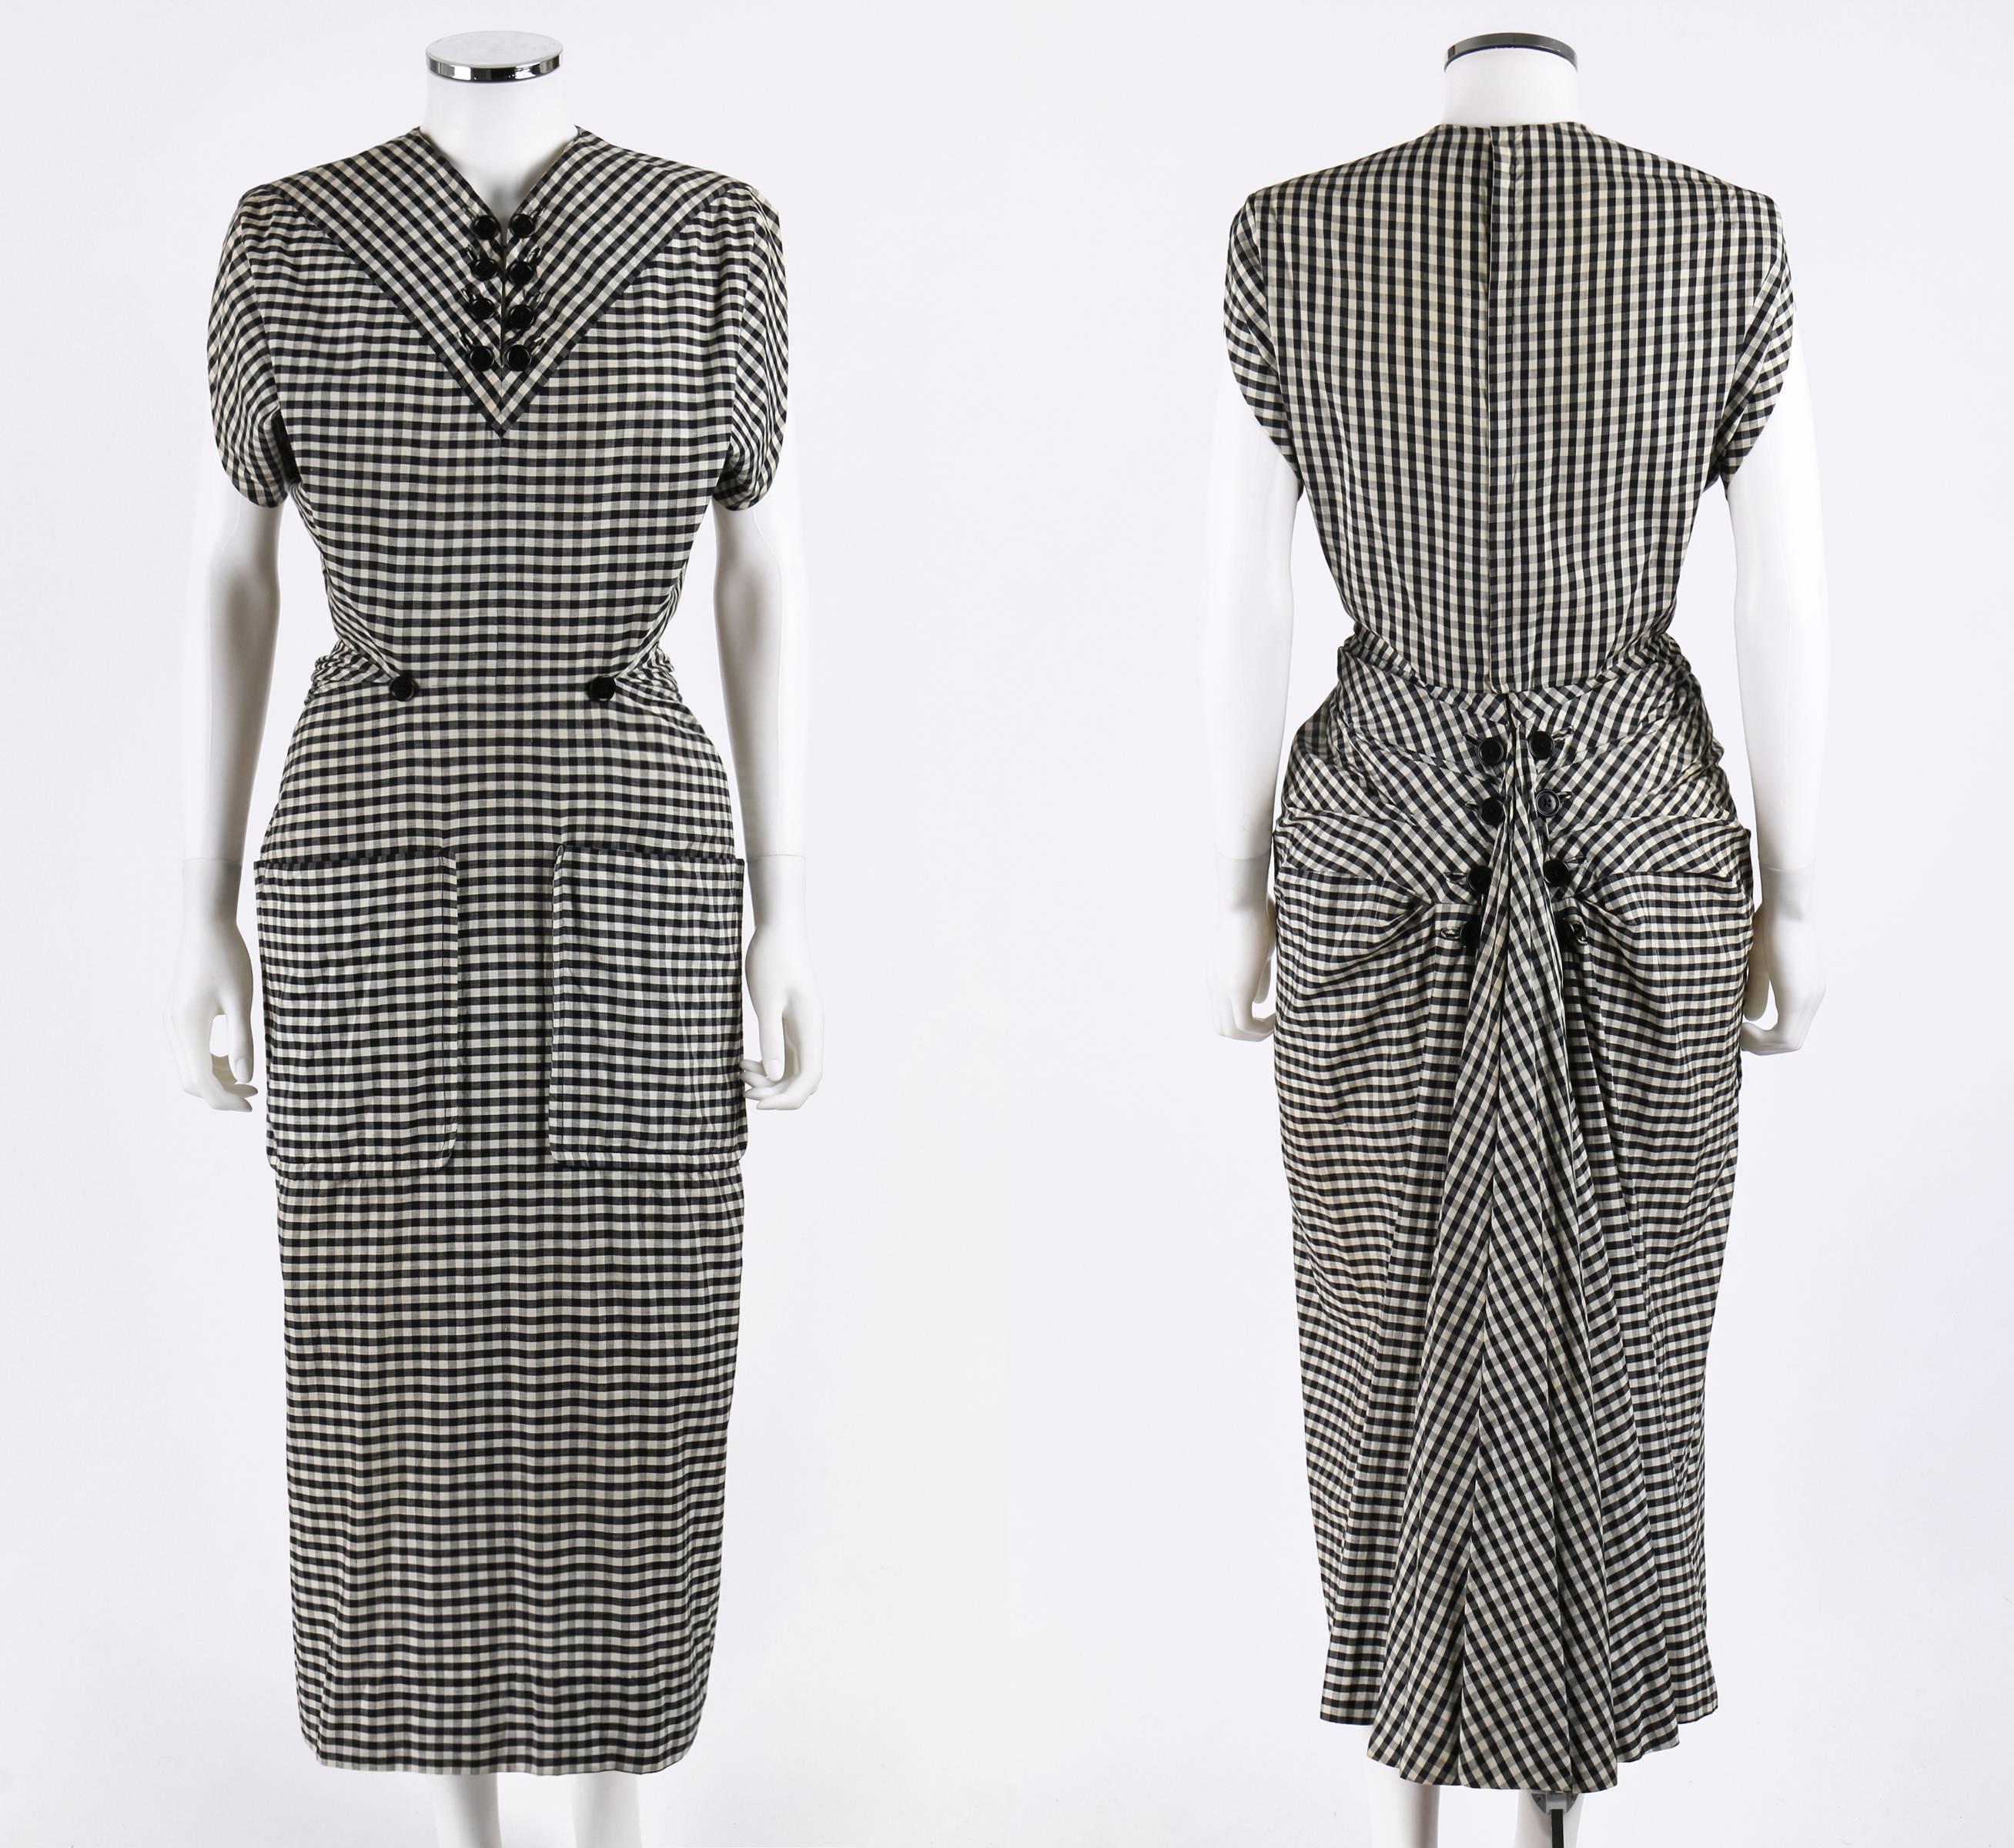 Incredibly rare Jacques Fath black and white cotton gingham dress from his Spring-Summer 1949 American collection for Joseph Halpert. Impeccably tailored fan-tail bustle back with peplum flair is embellished with buttons. Two large front patch